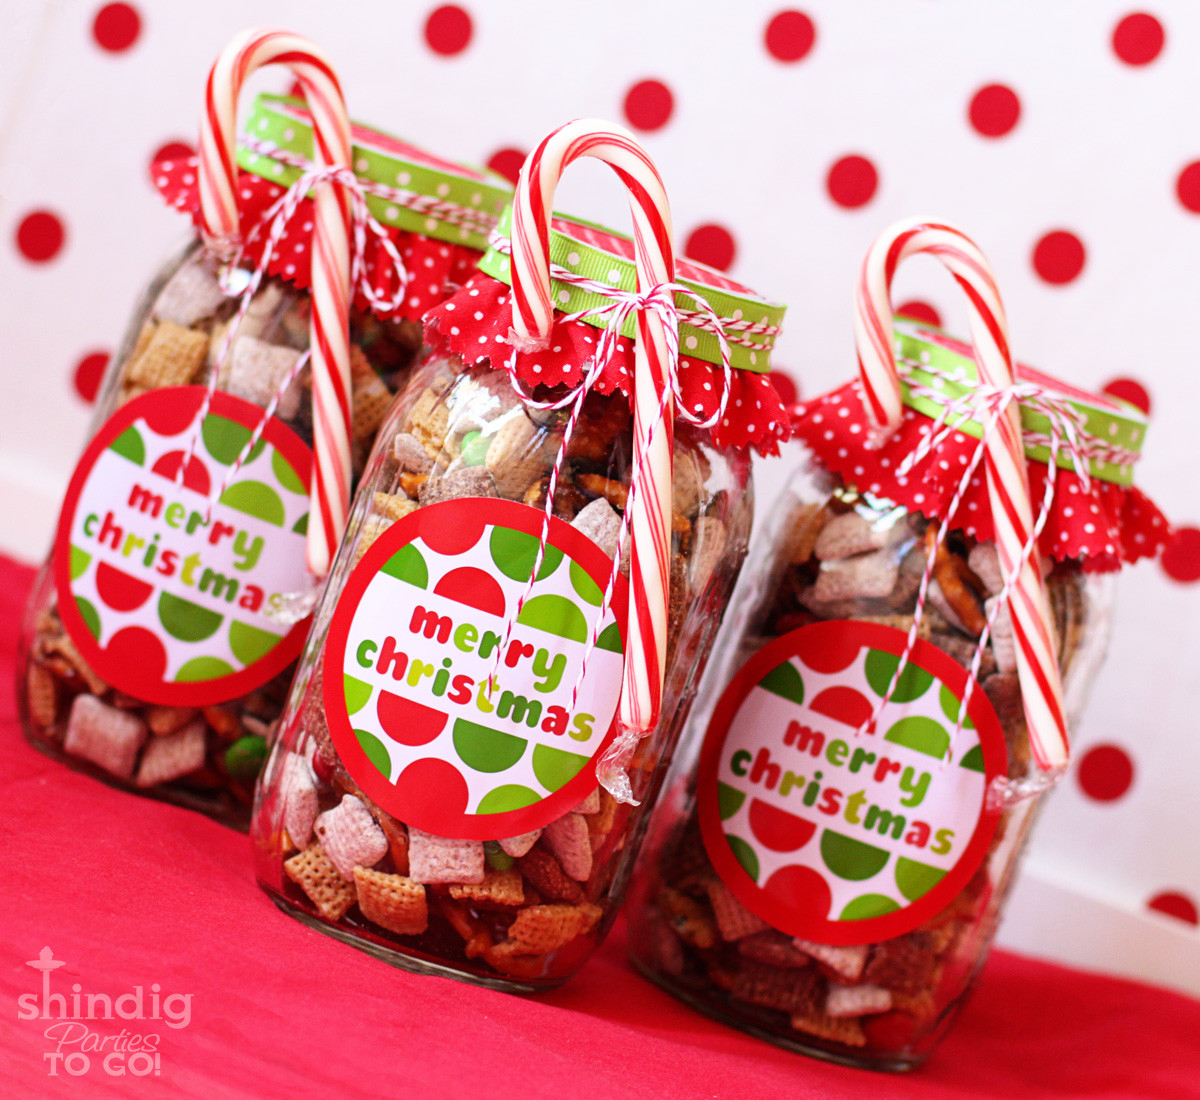 Christmas Candy Favors
 Amanda s Parties To Go FREE Merry Christmas Tags and Gift